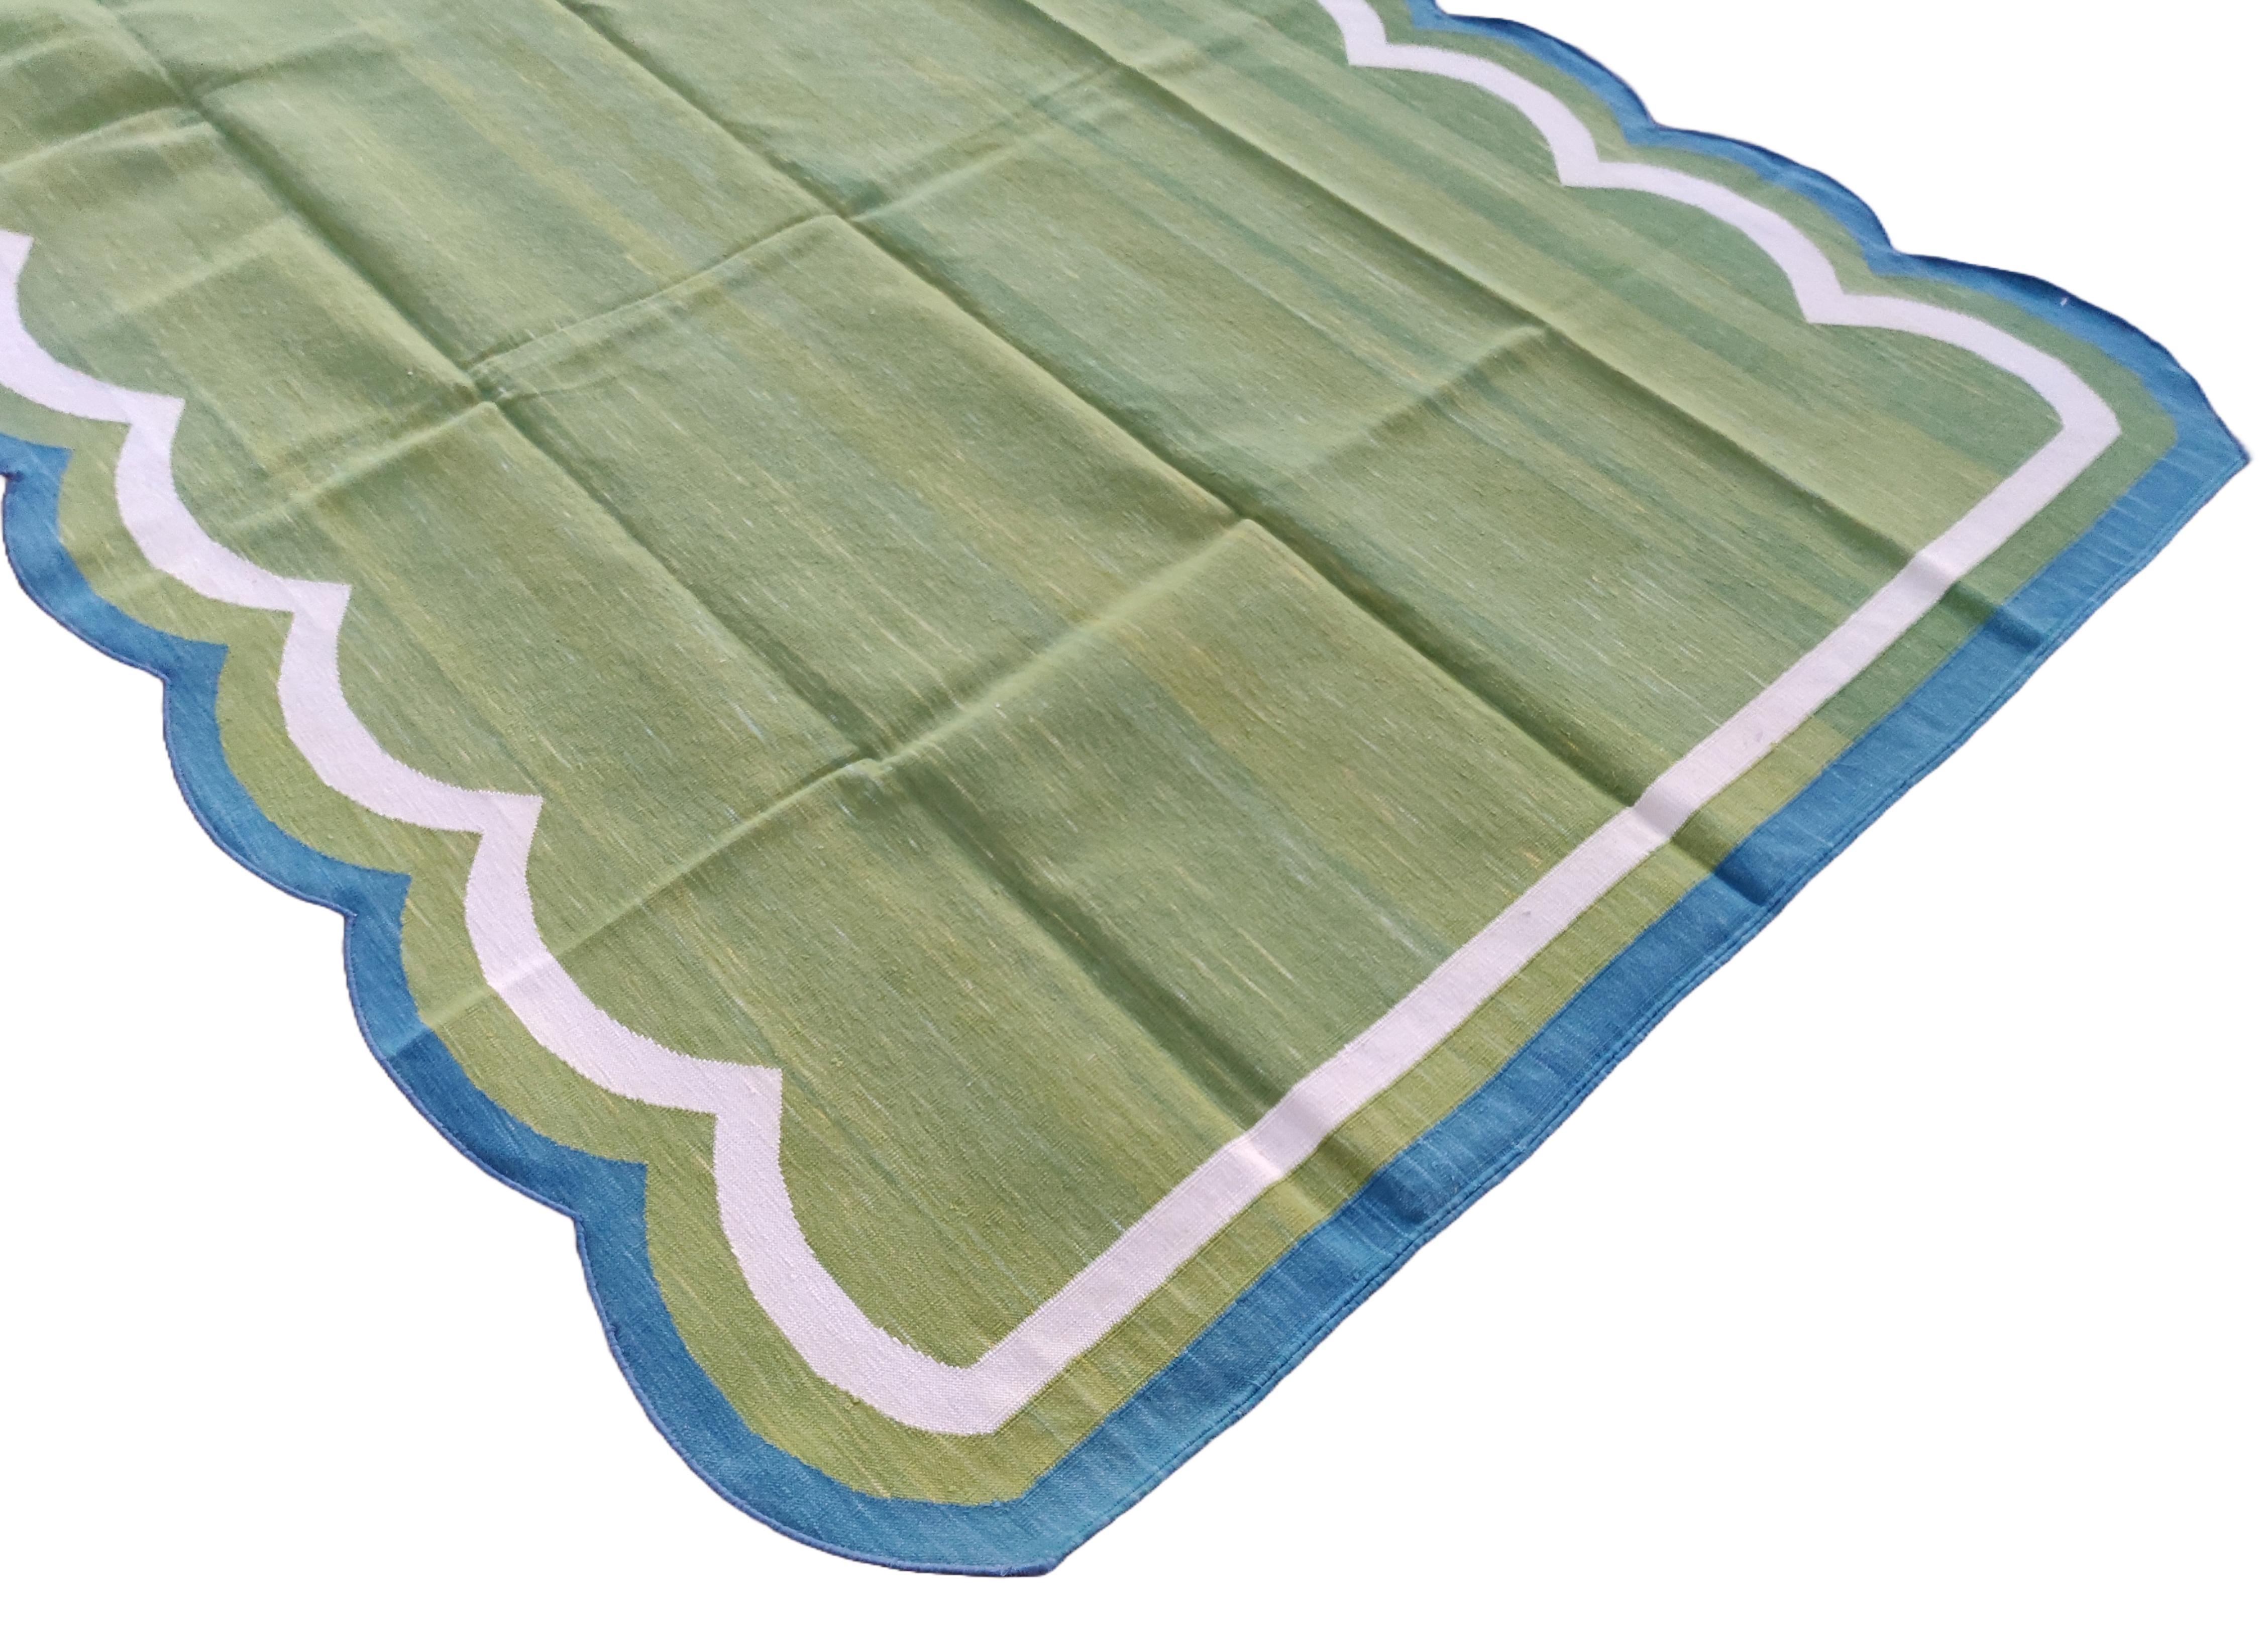 Mid-Century Modern Handmade Cotton Area Flat Weave Rug, 5x7 Green And Blue Scalloped Indian Dhurrie For Sale